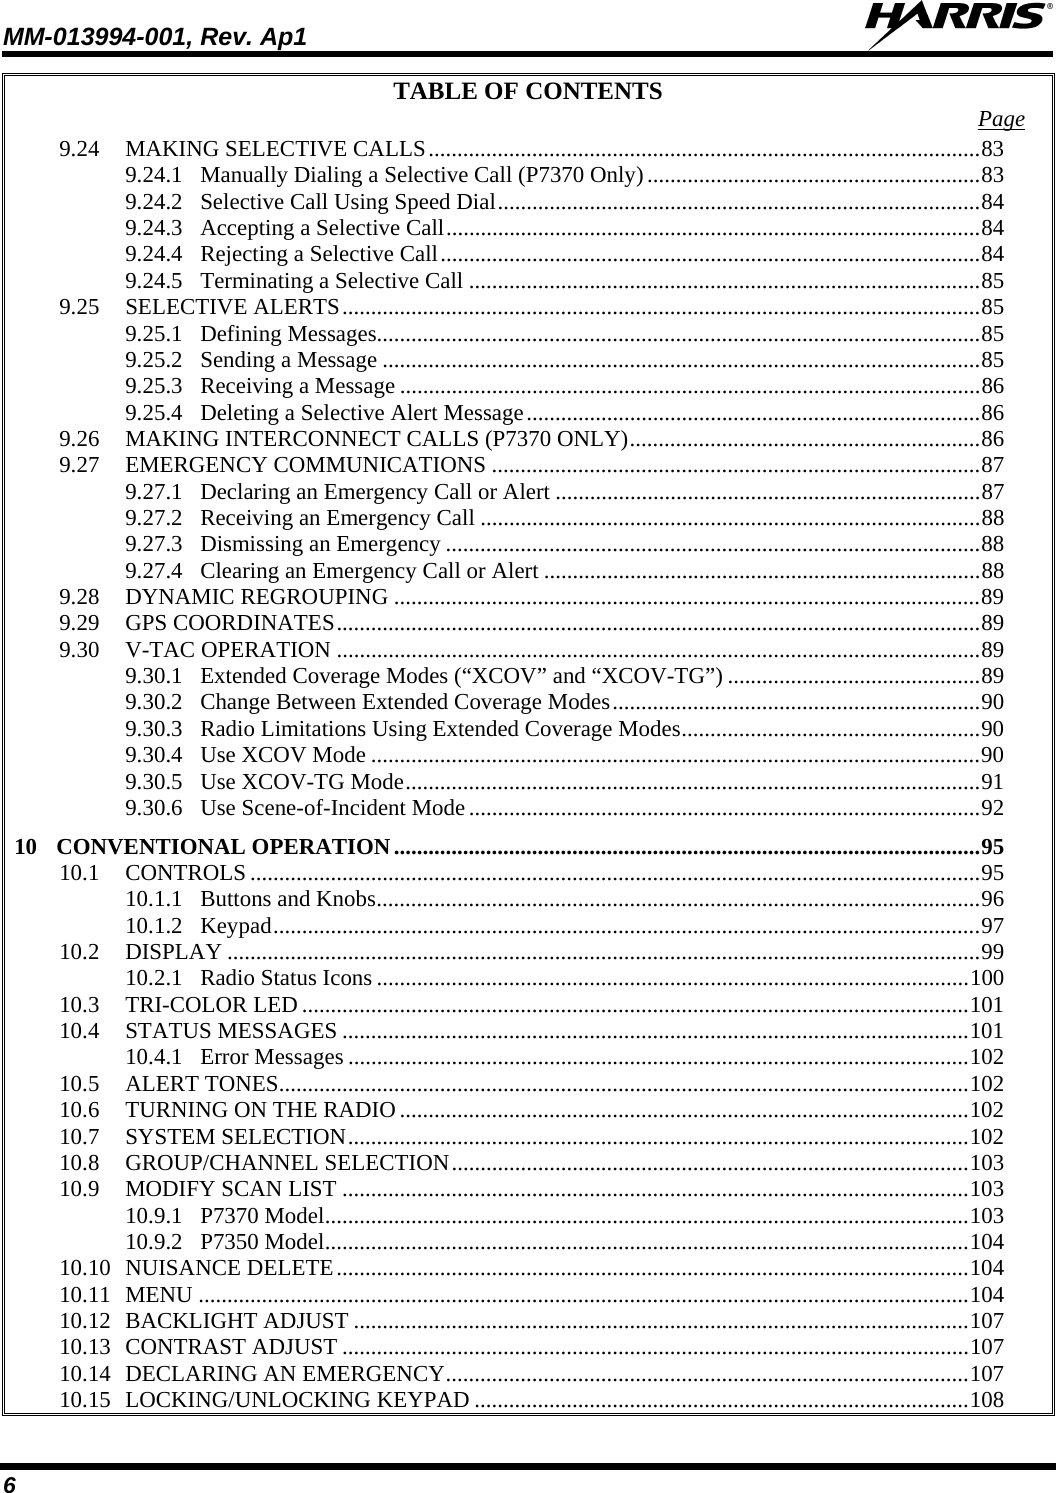 MM-013994-001, Rev. Ap1  6 TABLE OF CONTENTS  Page 9.24 MAKING SELECTIVE CALLS................................................................................................83 9.24.1 Manually Dialing a Selective Call (P7370 Only)..........................................................83 9.24.2 Selective Call Using Speed Dial....................................................................................84 9.24.3 Accepting a Selective Call.............................................................................................84 9.24.4 Rejecting a Selective Call..............................................................................................84 9.24.5 Terminating a Selective Call .........................................................................................85 9.25 SELECTIVE ALERTS...............................................................................................................85 9.25.1 Defining Messages.........................................................................................................85 9.25.2 Sending a Message ........................................................................................................85 9.25.3 Receiving a Message .....................................................................................................86 9.25.4 Deleting a Selective Alert Message...............................................................................86 9.26 MAKING INTERCONNECT CALLS (P7370 ONLY).............................................................86 9.27 EMERGENCY COMMUNICATIONS .....................................................................................87 9.27.1 Declaring an Emergency Call or Alert ..........................................................................87 9.27.2 Receiving an Emergency Call .......................................................................................88 9.27.3 Dismissing an Emergency .............................................................................................88 9.27.4 Clearing an Emergency Call or Alert ............................................................................88 9.28 DYNAMIC REGROUPING ......................................................................................................89 9.29 GPS COORDINATES................................................................................................................89 9.30 V-TAC OPERATION ................................................................................................................89 9.30.1 Extended Coverage Modes (“XCOV” and “XCOV-TG”) ............................................89 9.30.2 Change Between Extended Coverage Modes................................................................90 9.30.3 Radio Limitations Using Extended Coverage Modes....................................................90 9.30.4 Use XCOV Mode ..........................................................................................................90 9.30.5 Use XCOV-TG Mode....................................................................................................91 9.30.6 Use Scene-of-Incident Mode.........................................................................................92 10 CONVENTIONAL OPERATION......................................................................................................95 10.1 CONTROLS ...............................................................................................................................95 10.1.1 Buttons and Knobs.........................................................................................................96 10.1.2 Keypad...........................................................................................................................97 10.2 DISPLAY ...................................................................................................................................99 10.2.1 Radio Status Icons .......................................................................................................100 10.3 TRI-COLOR LED ....................................................................................................................101 10.4 STATUS MESSAGES .............................................................................................................101 10.4.1 Error Messages ............................................................................................................102 10.5 ALERT TONES........................................................................................................................102 10.6 TURNING ON THE RADIO ...................................................................................................102 10.7 SYSTEM SELECTION............................................................................................................102 10.8 GROUP/CHANNEL SELECTION..........................................................................................103 10.9 MODIFY SCAN LIST .............................................................................................................103 10.9.1 P7370 Model................................................................................................................103 10.9.2 P7350 Model................................................................................................................104 10.10 NUISANCE DELETE..............................................................................................................104 10.11 MENU ......................................................................................................................................104 10.12 BACKLIGHT ADJUST ...........................................................................................................107 10.13 CONTRAST ADJUST .............................................................................................................107 10.14 DECLARING AN EMERGENCY...........................................................................................107 10.15 LOCKING/UNLOCKING KEYPAD ......................................................................................108 